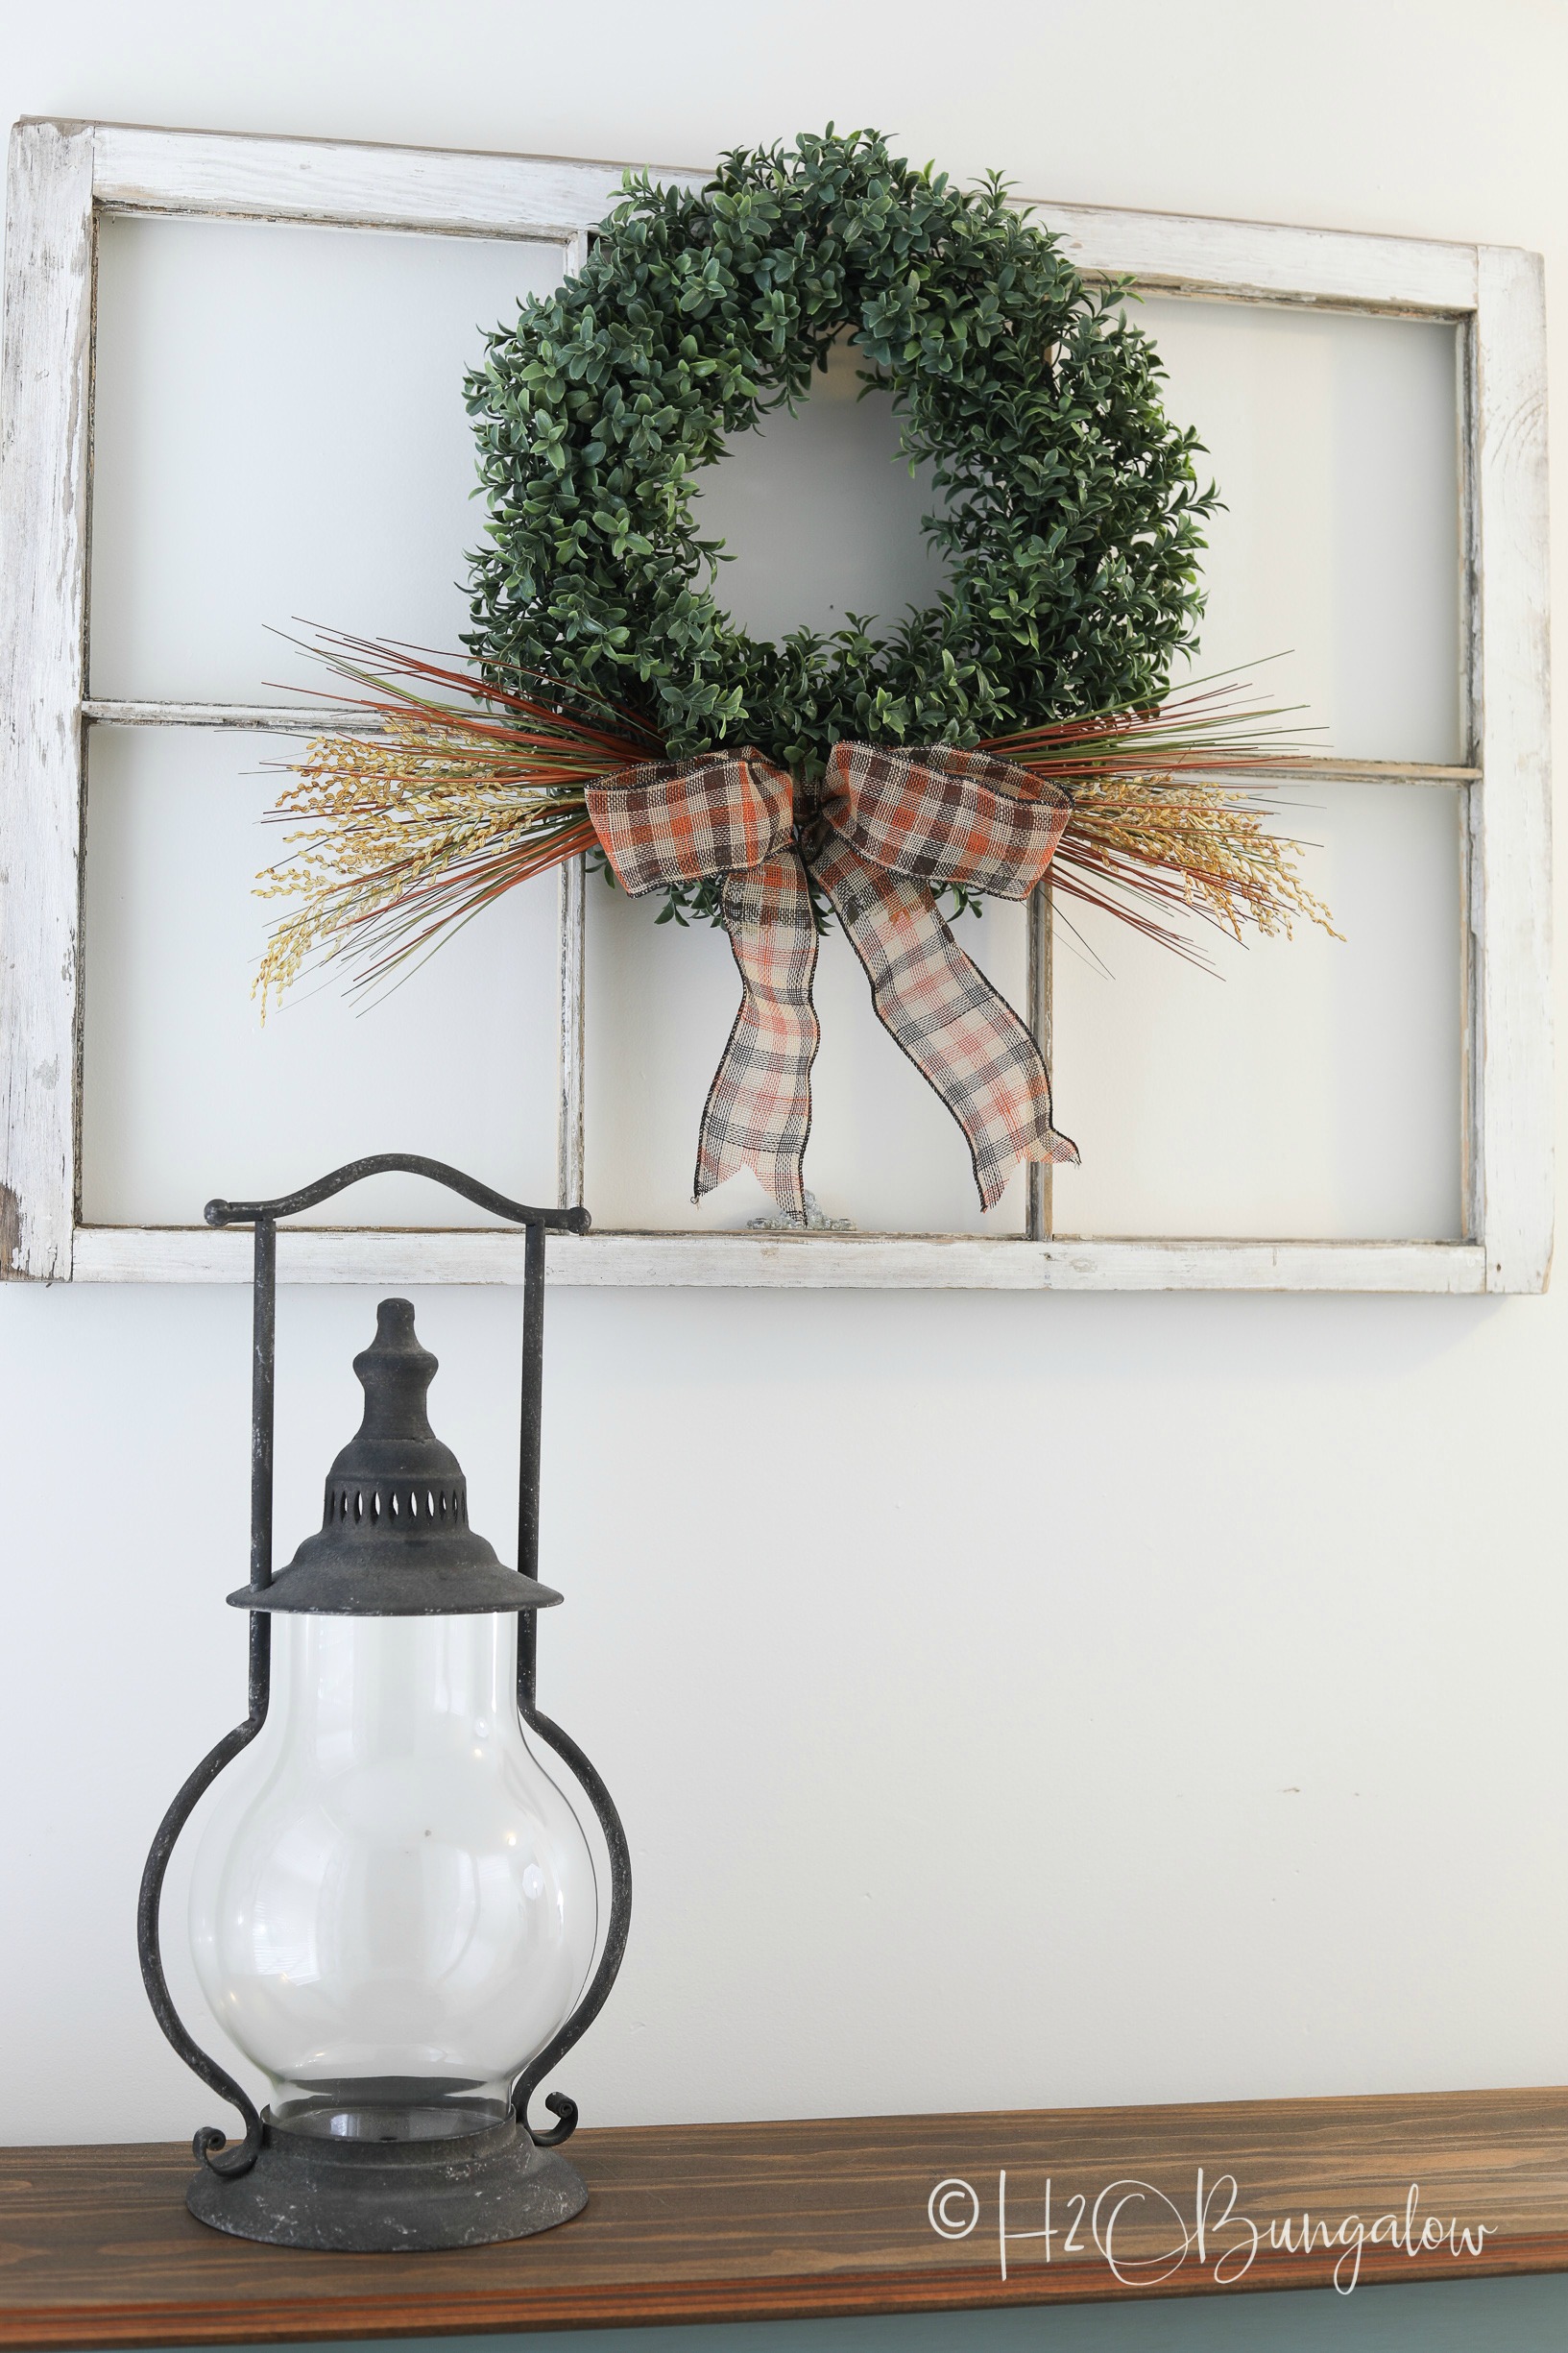 Make this easy fall boxwood wreath following my simple video tutorial. Quick and pretty fall decor for your front door or fireplace mantel. 